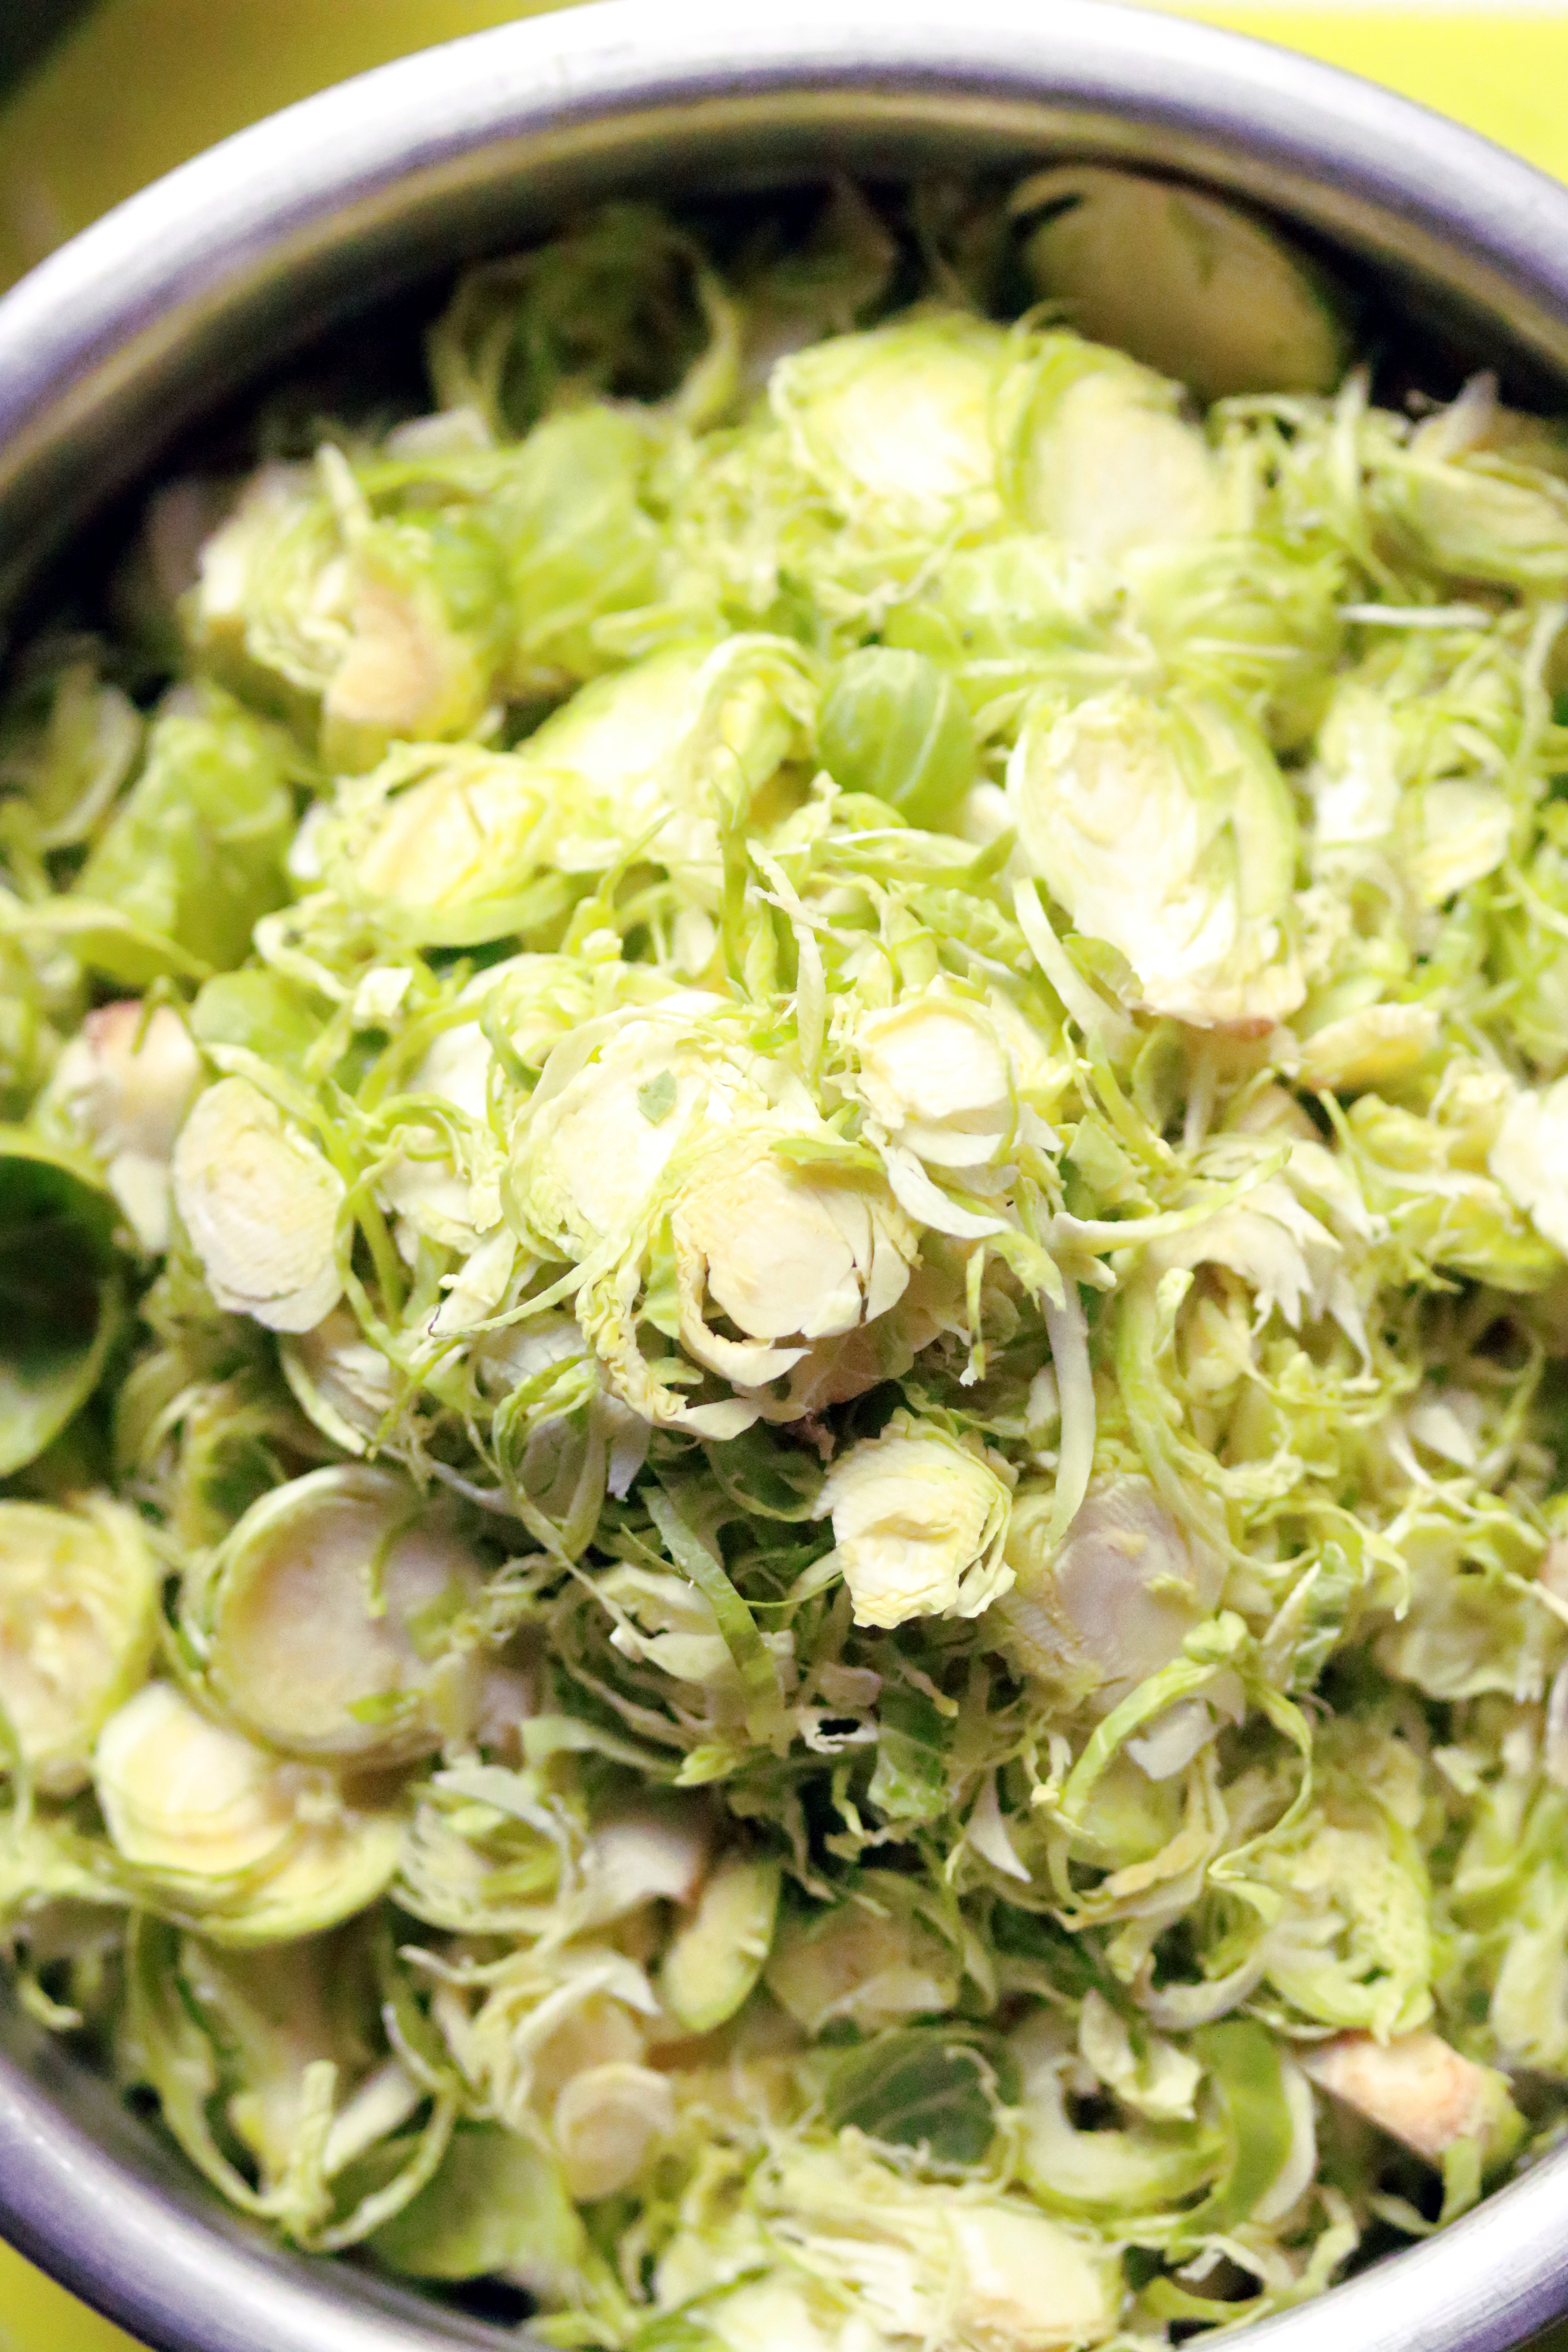 Shredded Brussel Sprouts